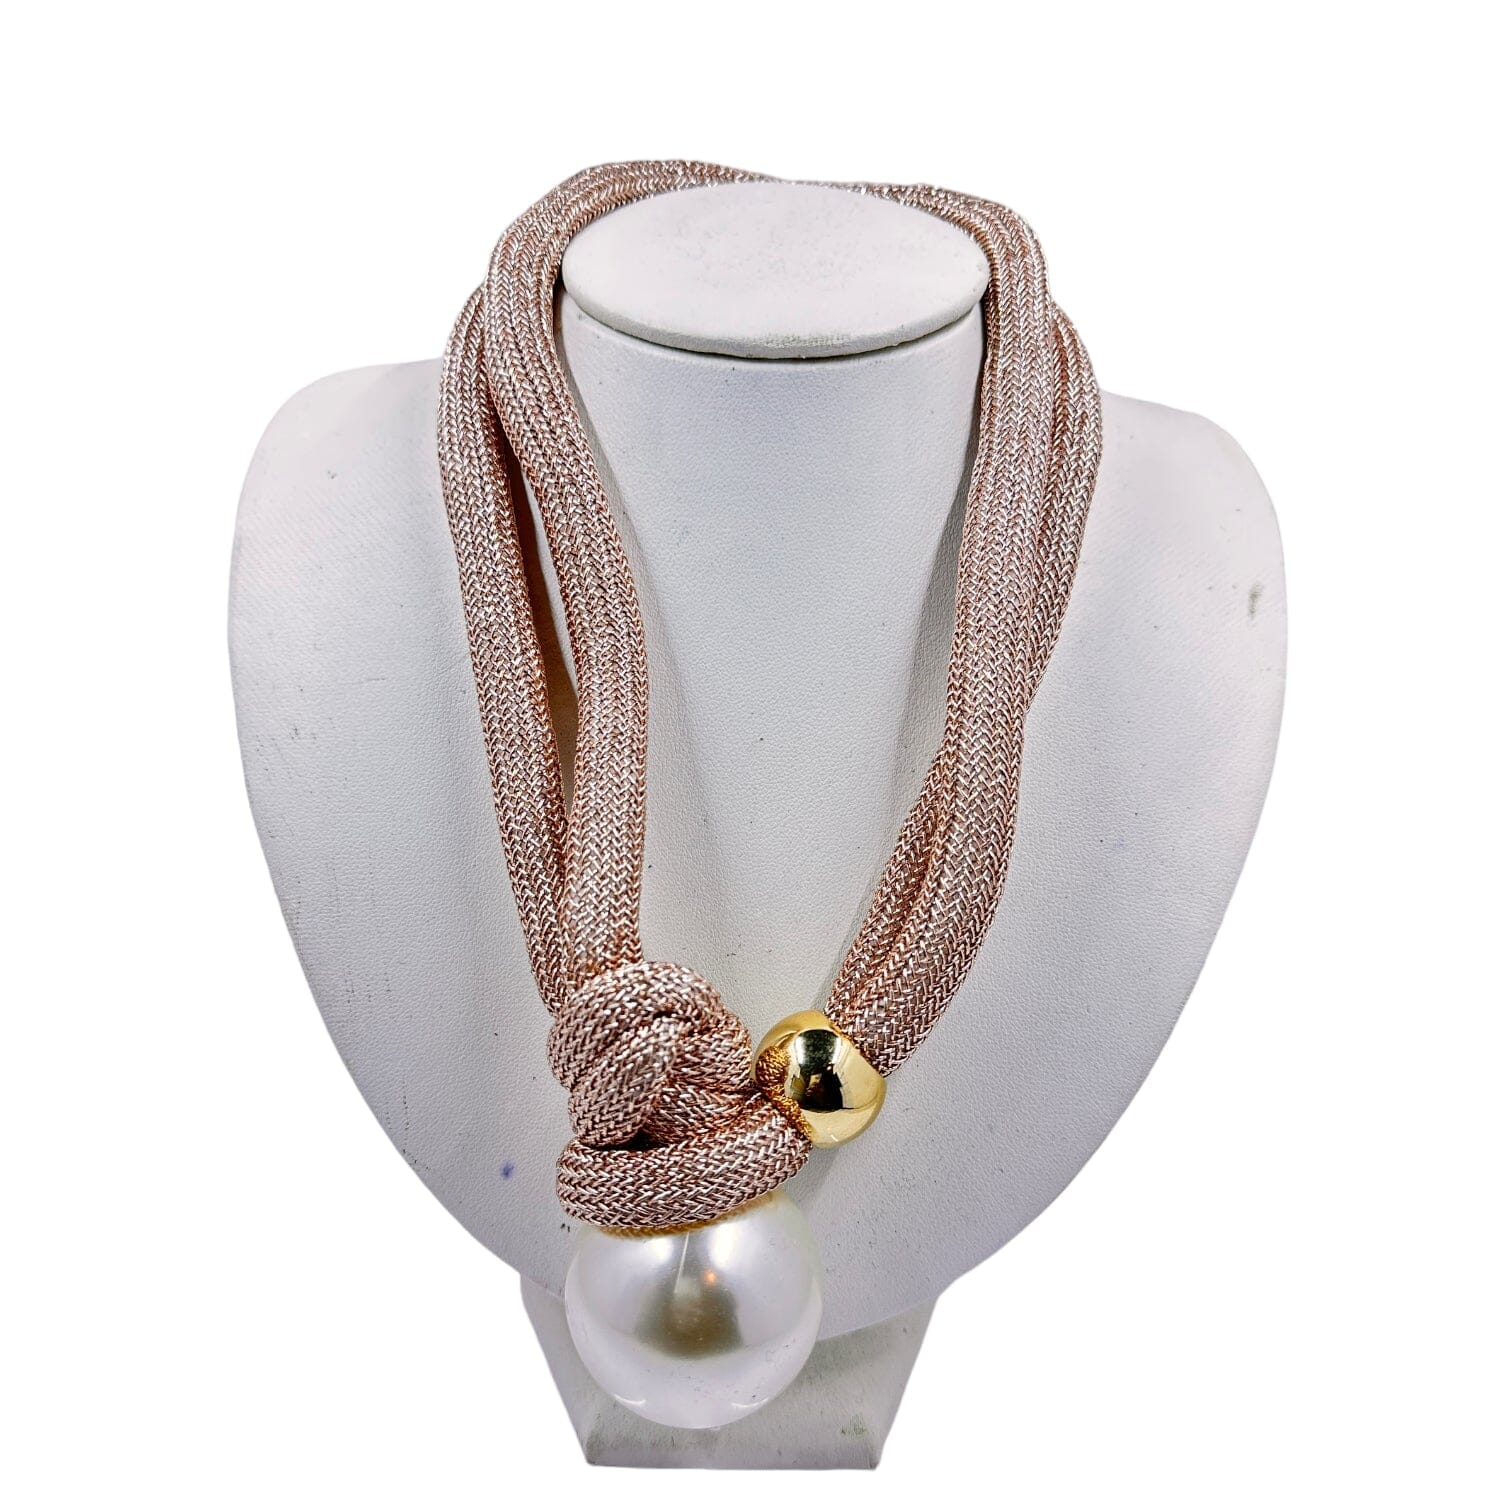 Woven Imitation Pearl Rope Necklace - Ruby Lane